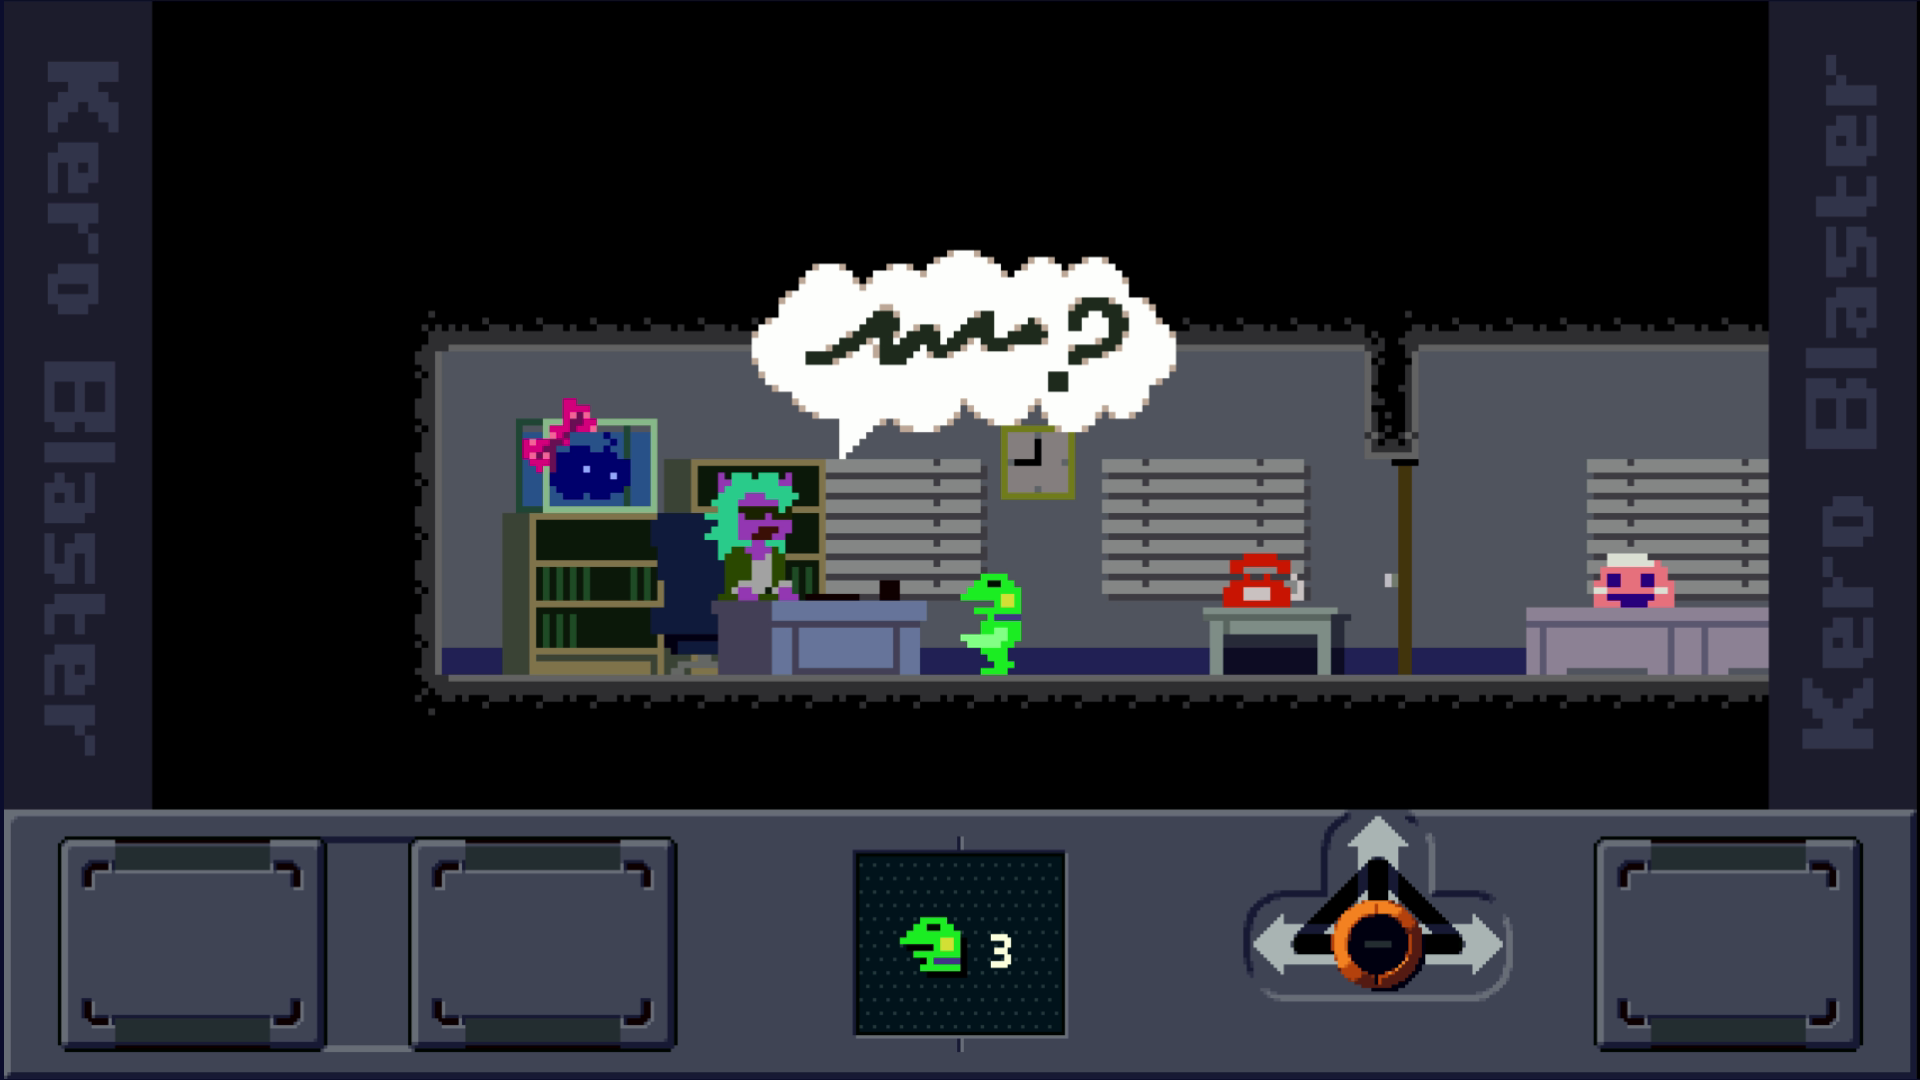 RELEASE] Kero Blaster v1.1 - Port two free spin-off games pink